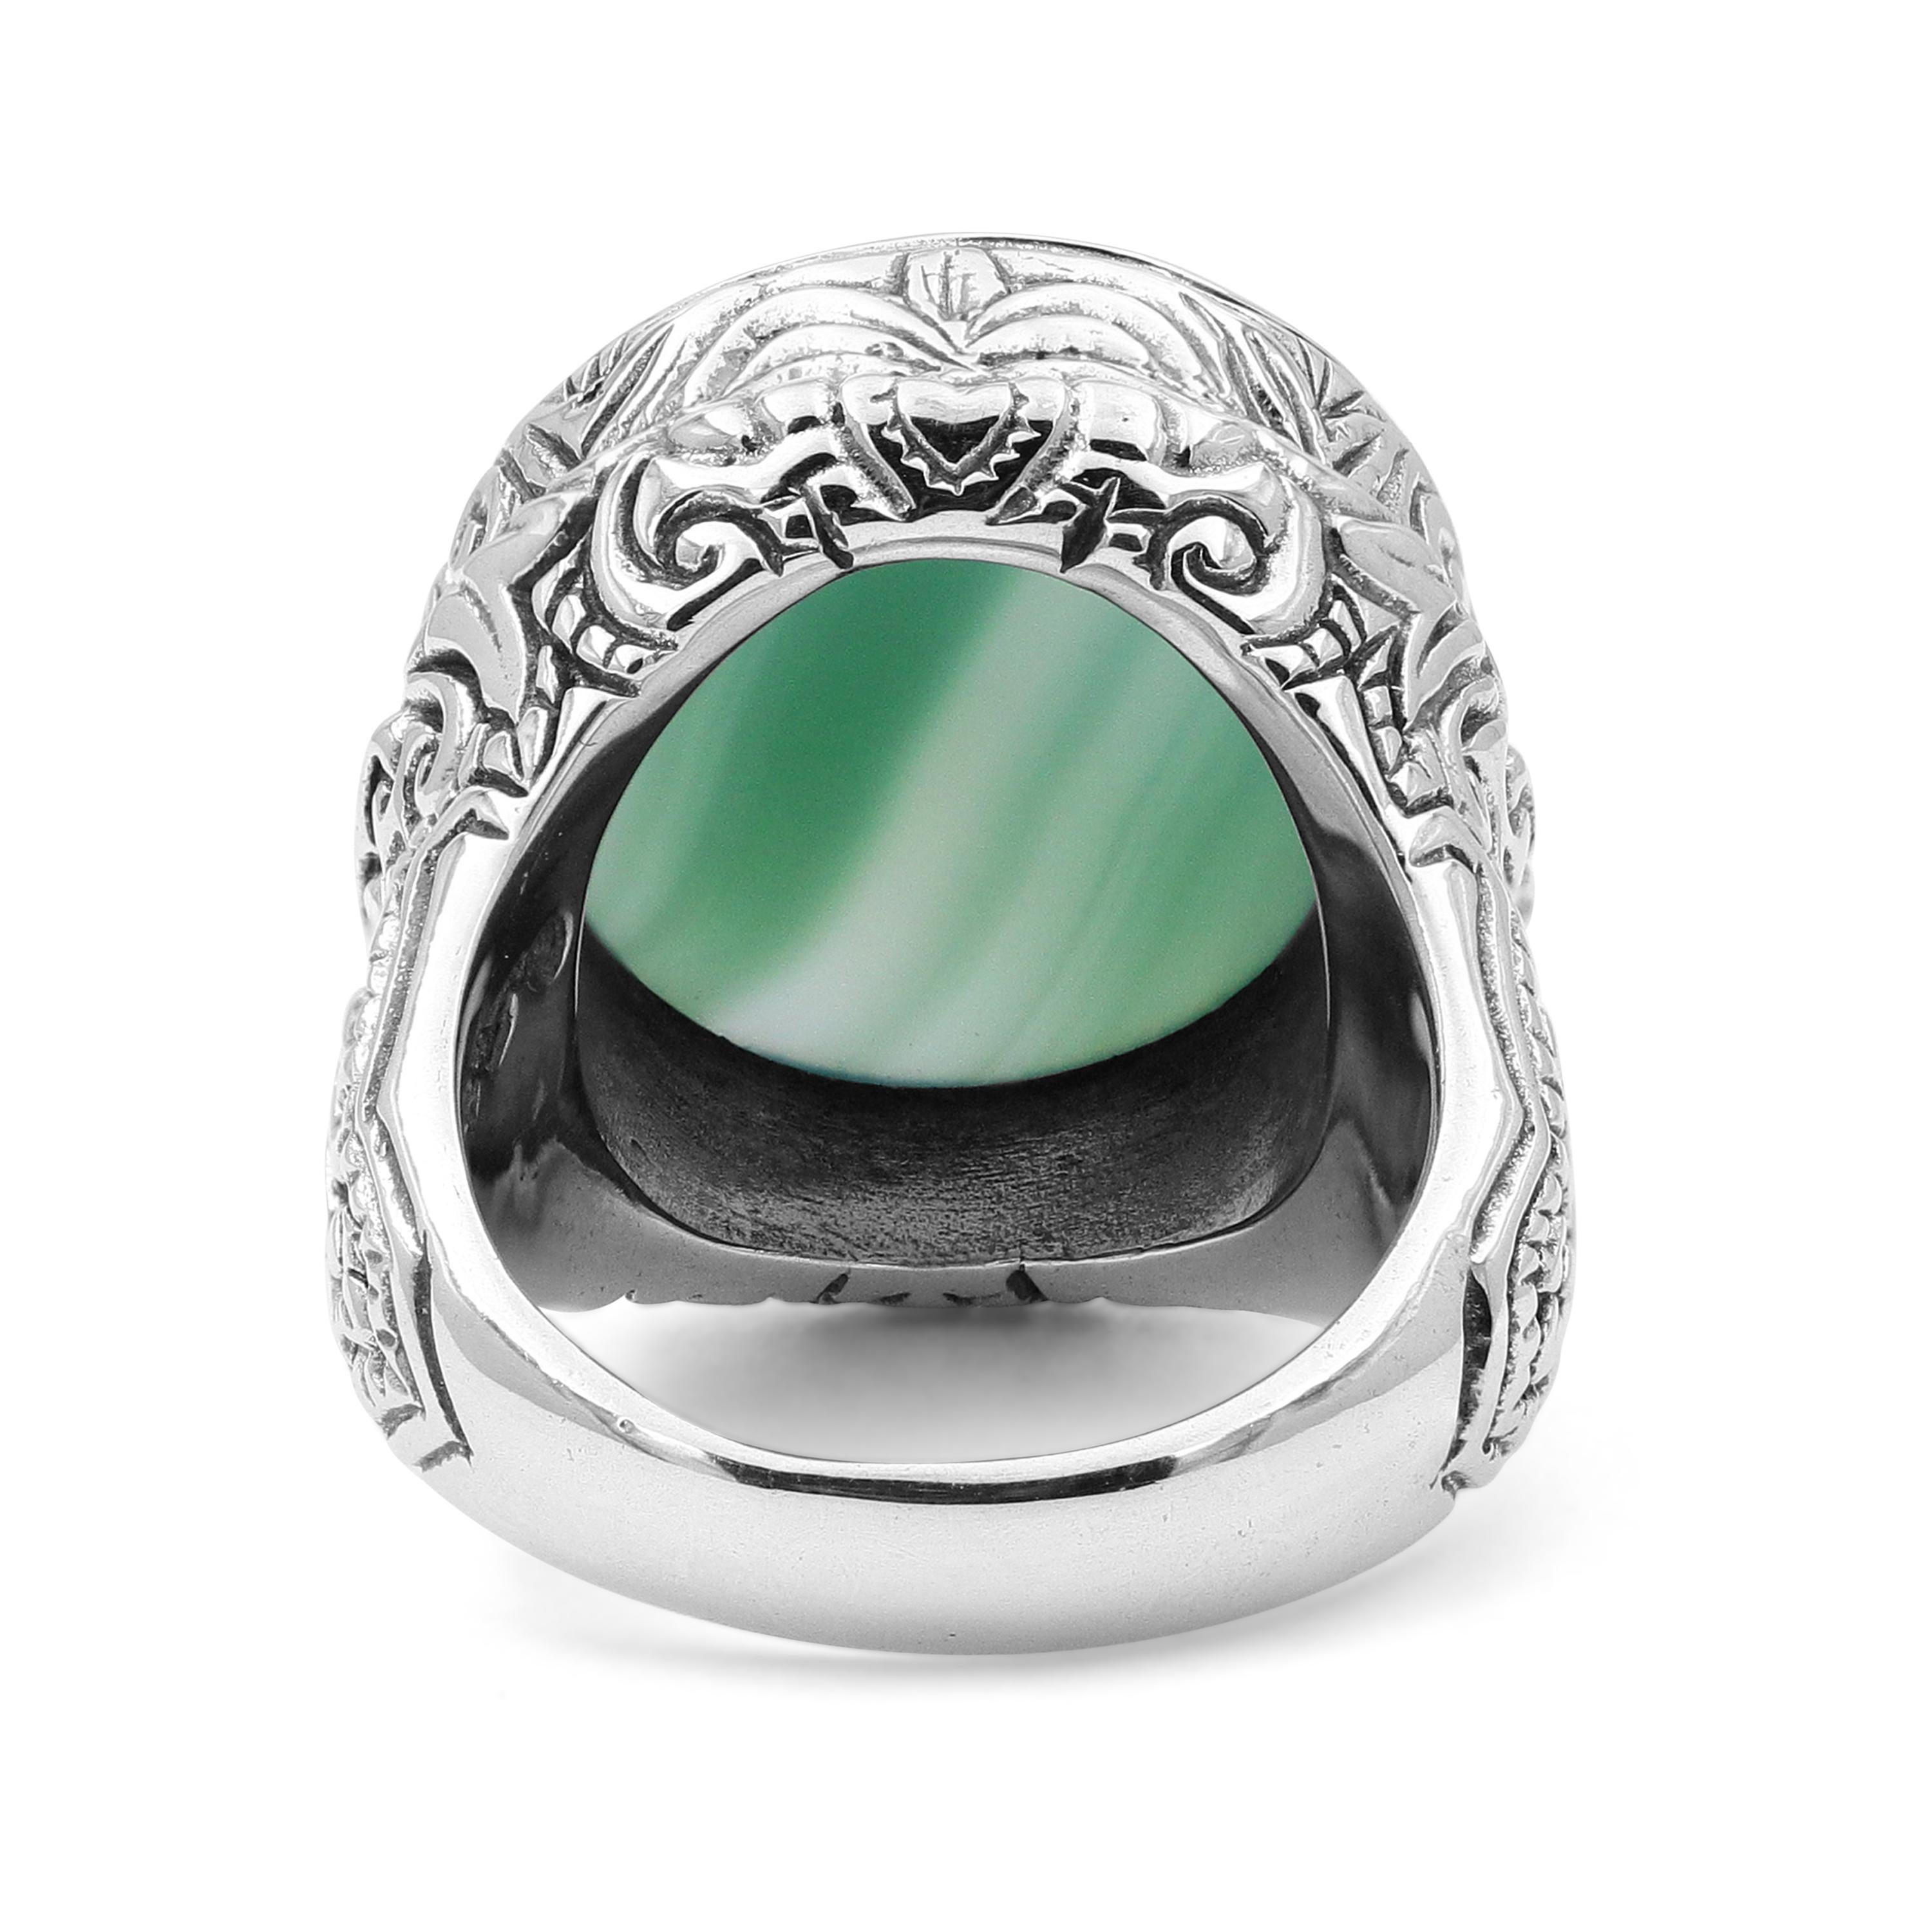 Contemporary Stephen Dweck Sterling Silver and Agate Ring Sz 7.5 For Sale